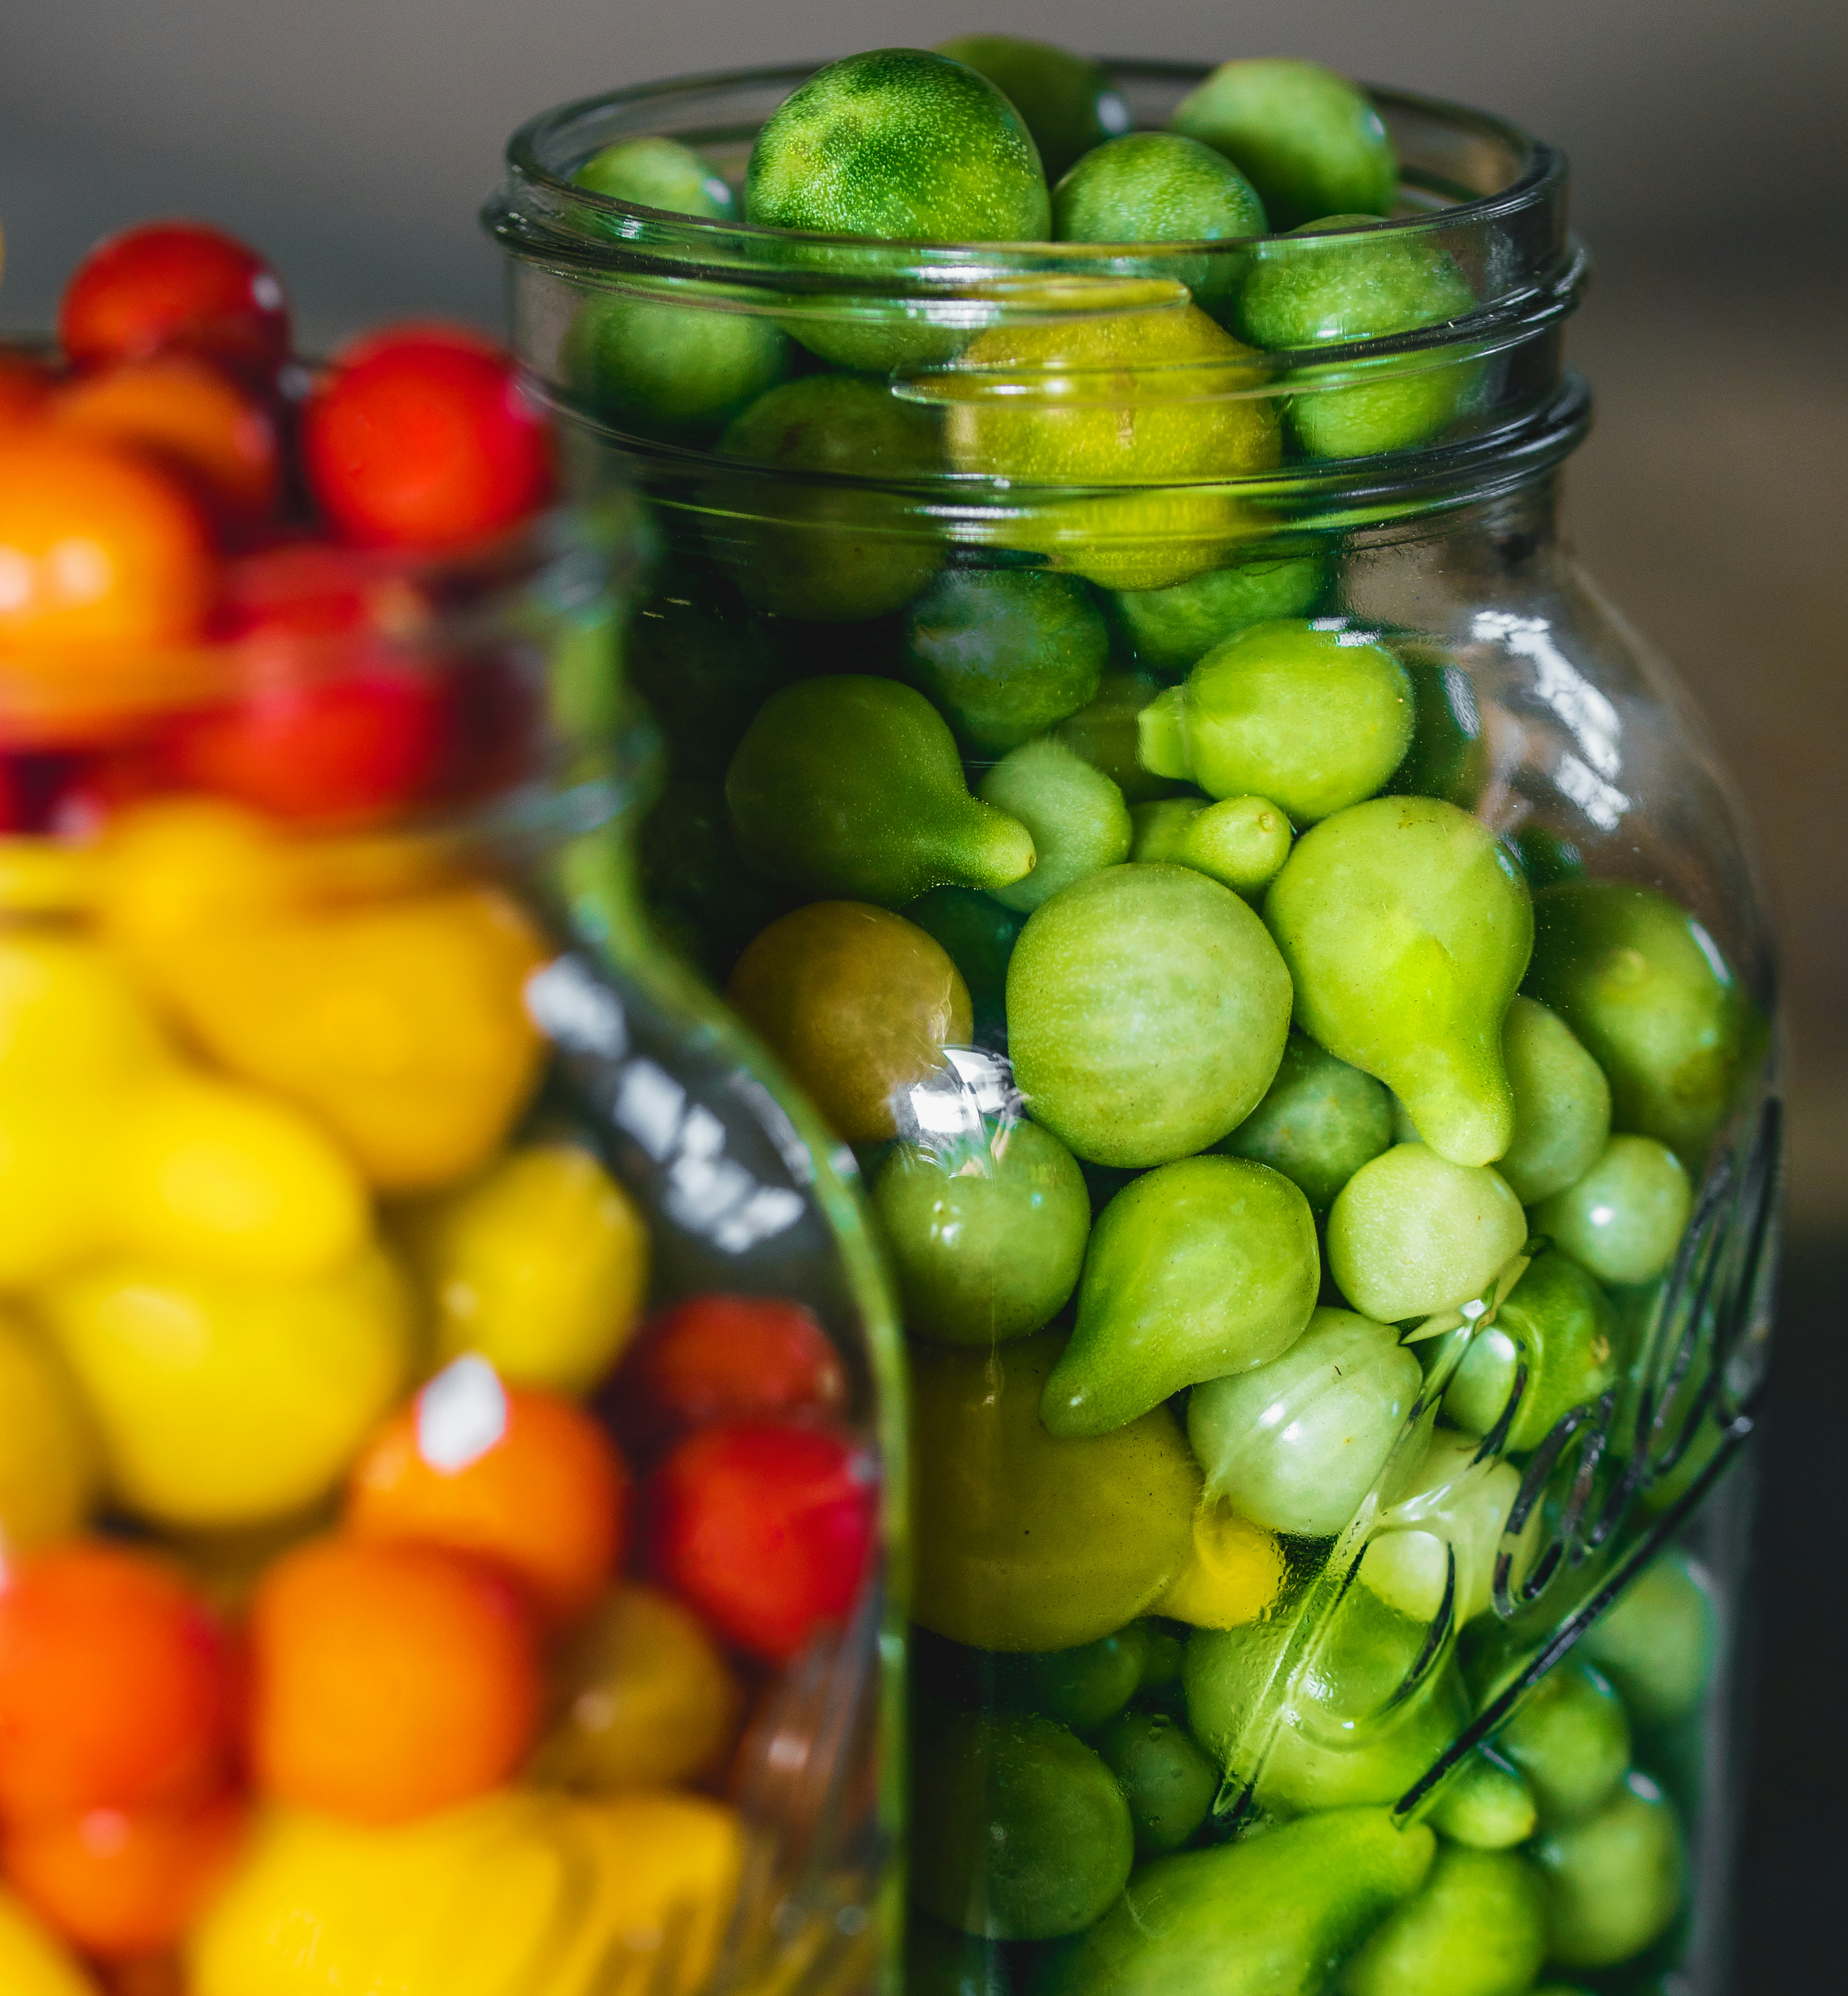 green and yellow round fruits in clear glass jar